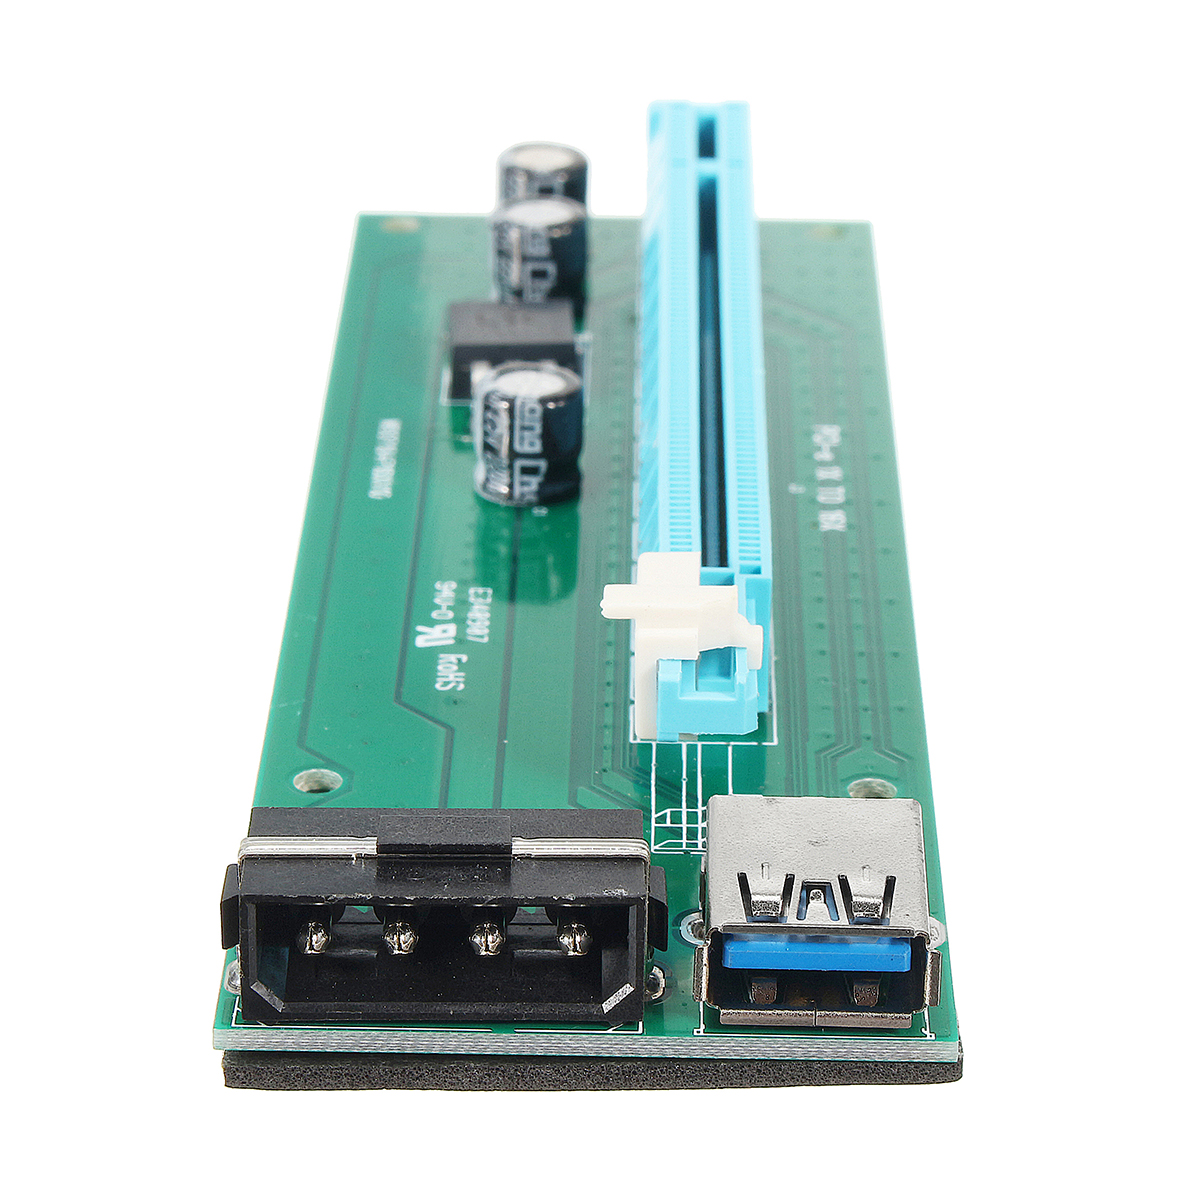 PCI-E-1X-to-16X-Mining-Machine-Enhanced-Extender-Riser-Adapter-With-Power-Cable-1972752-9